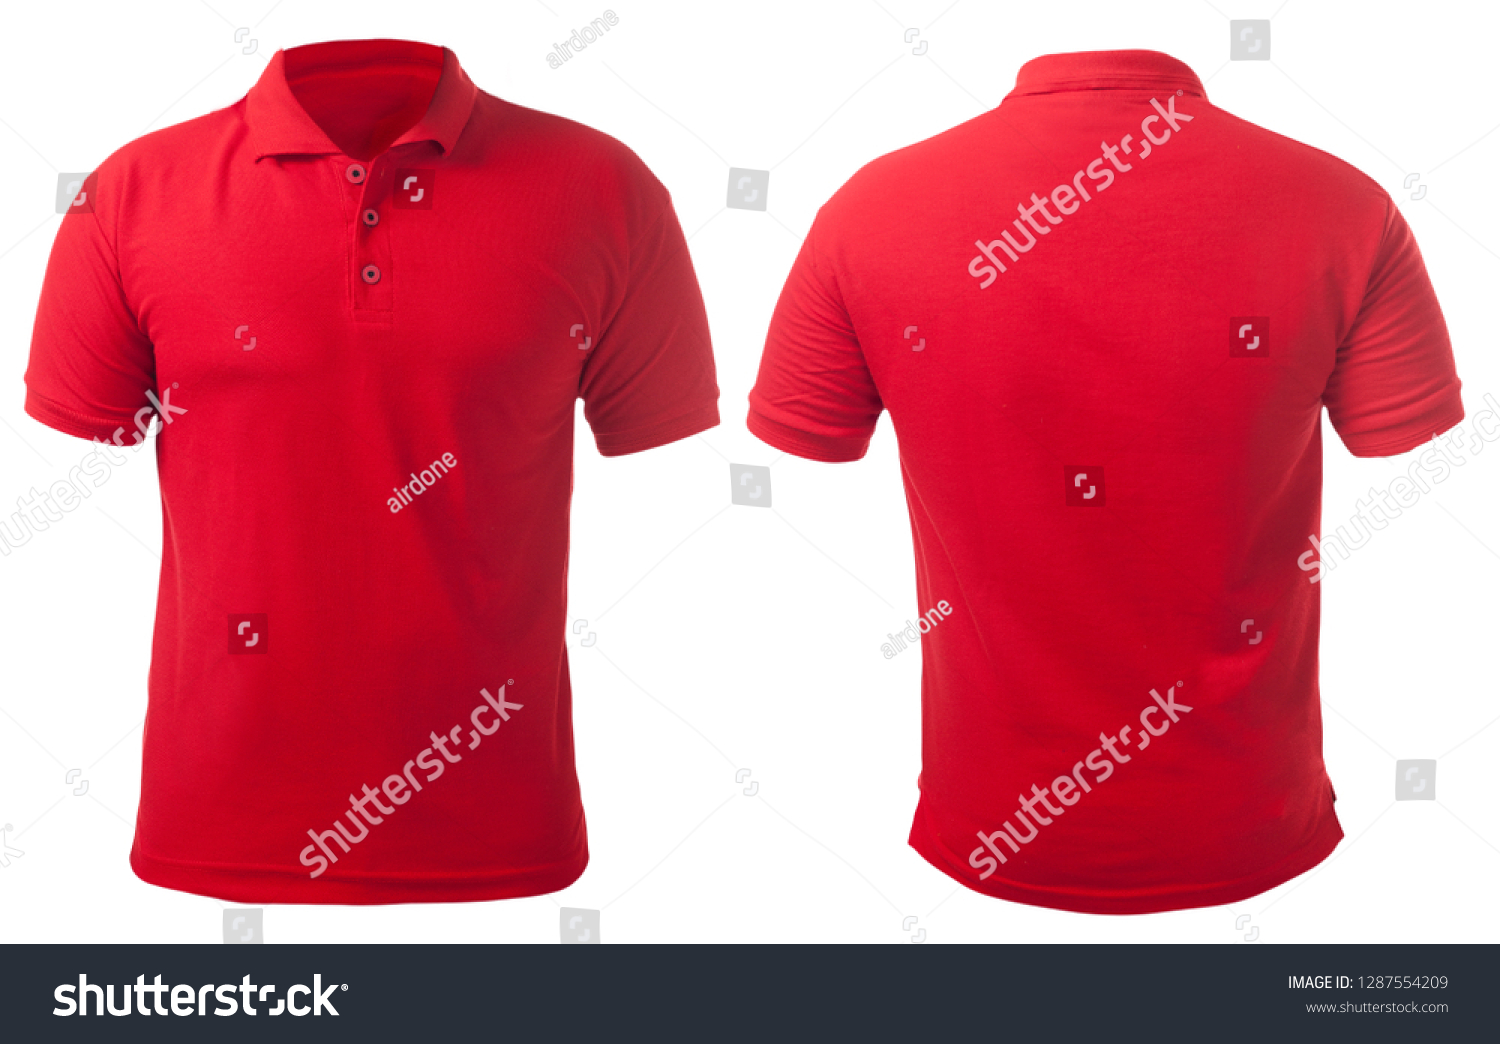 1,636 Red polo shirt mockup Images, Stock Photos & Vectors | Shutterstock